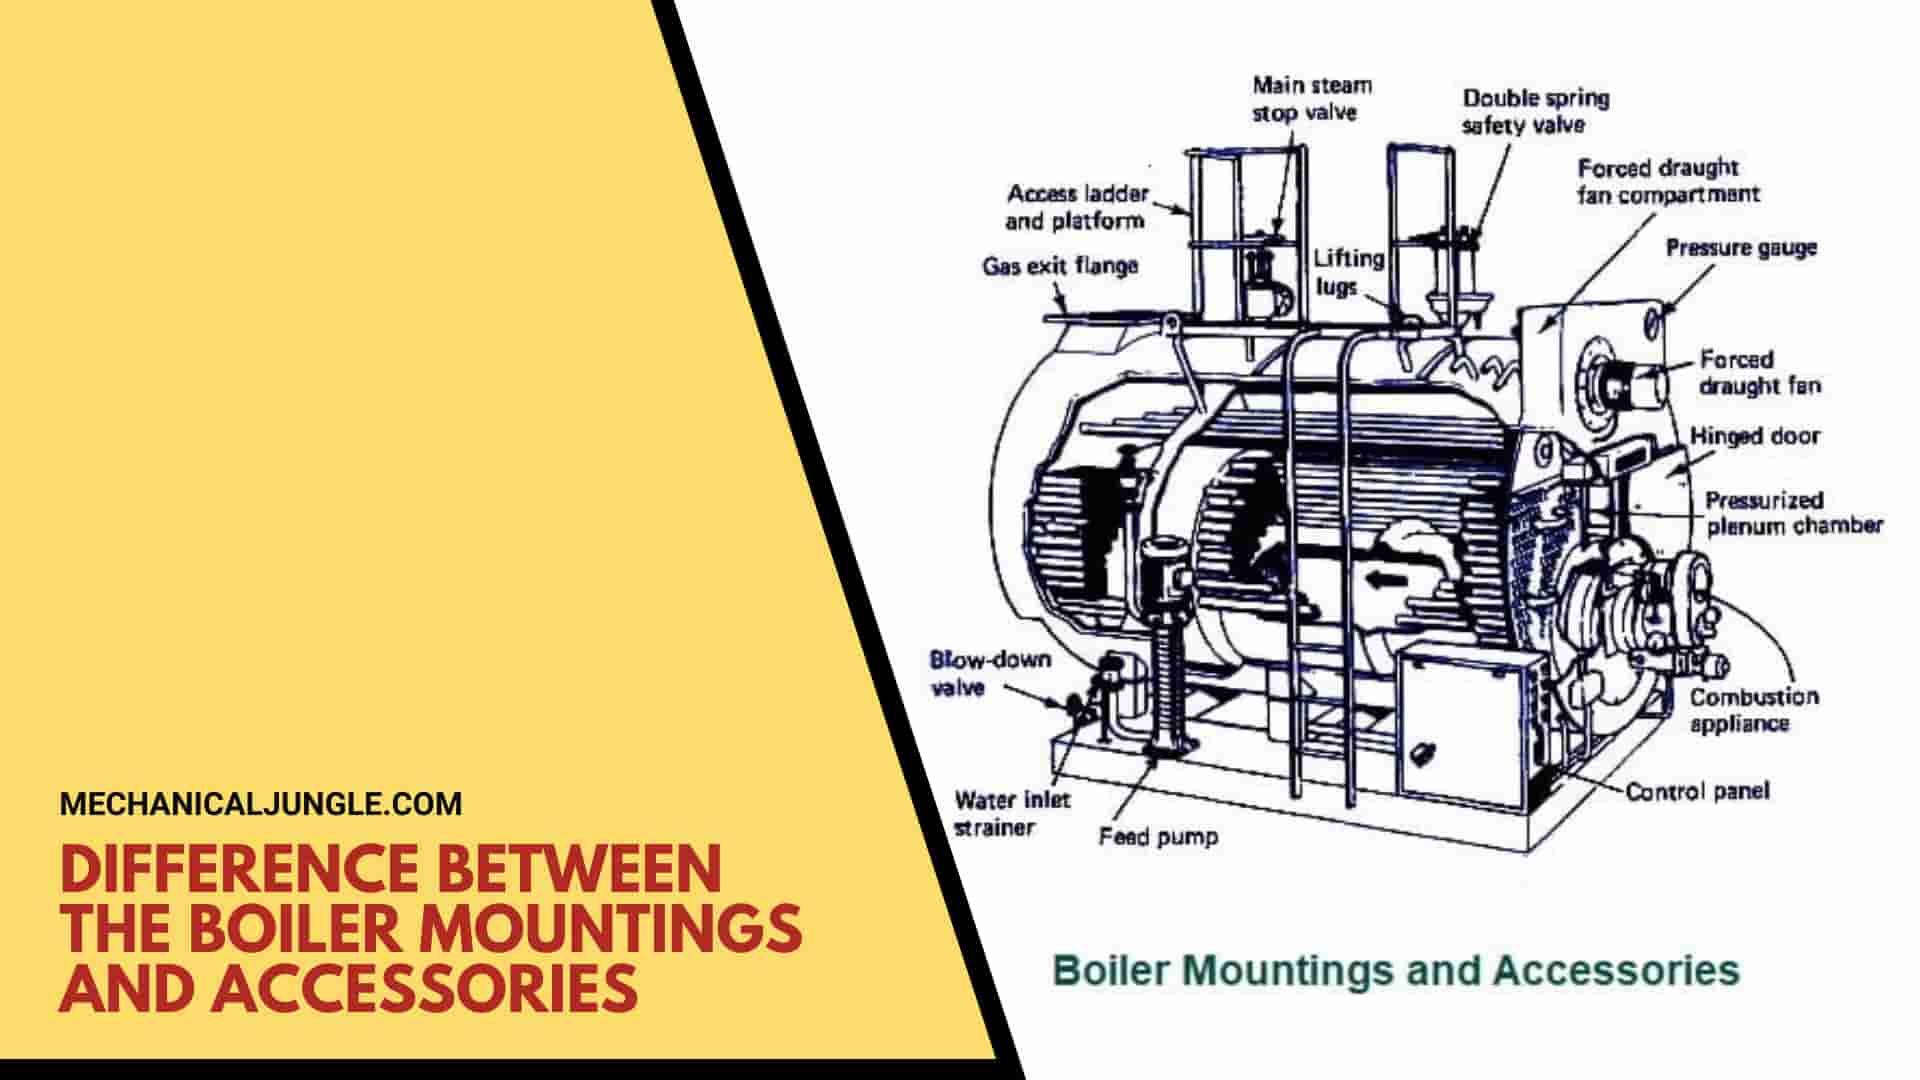 Difference Between the Boiler Mountings and Accessories